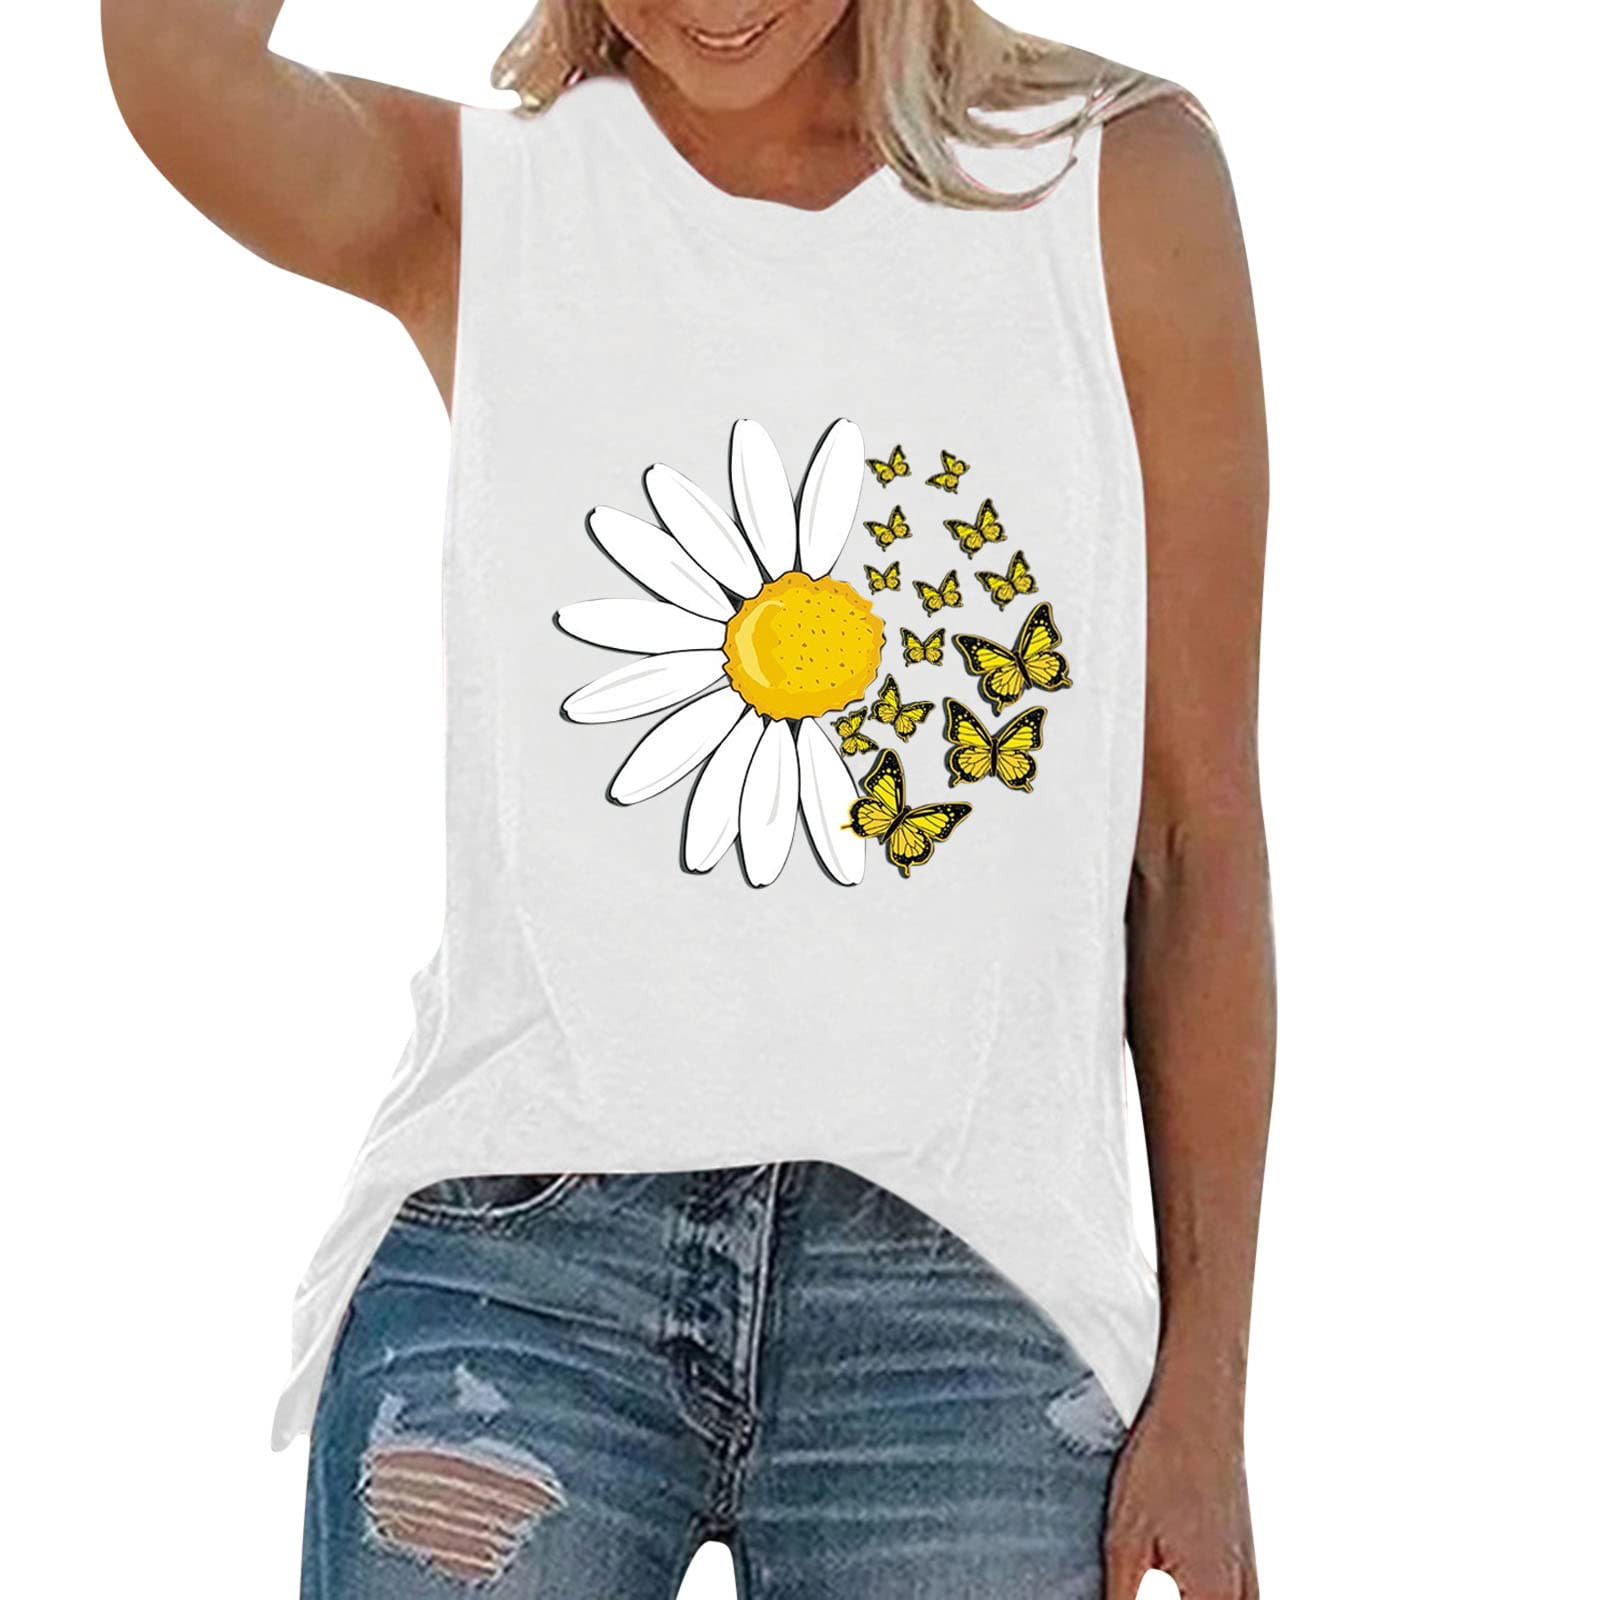 Short Sleeve Tee Blouse for Women,Amiley Women Casual Sunflower Printed T Shirt Girls Outdoor V Neck Comfy Blouse Top 